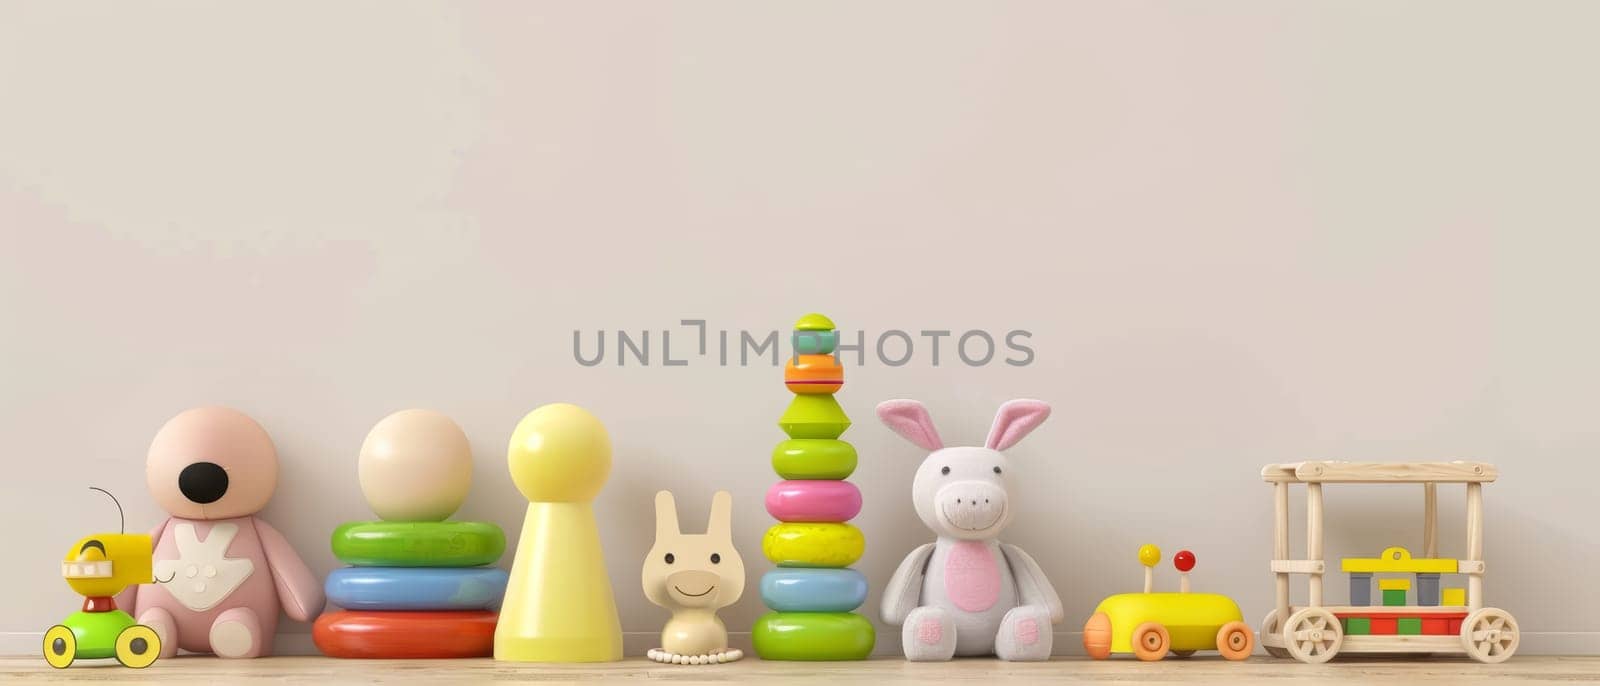 A minimalist nursery setup with soft-toned toys, including a pastel stacking tower and plush rabbit, creating a calm and soothing play area. by sfinks